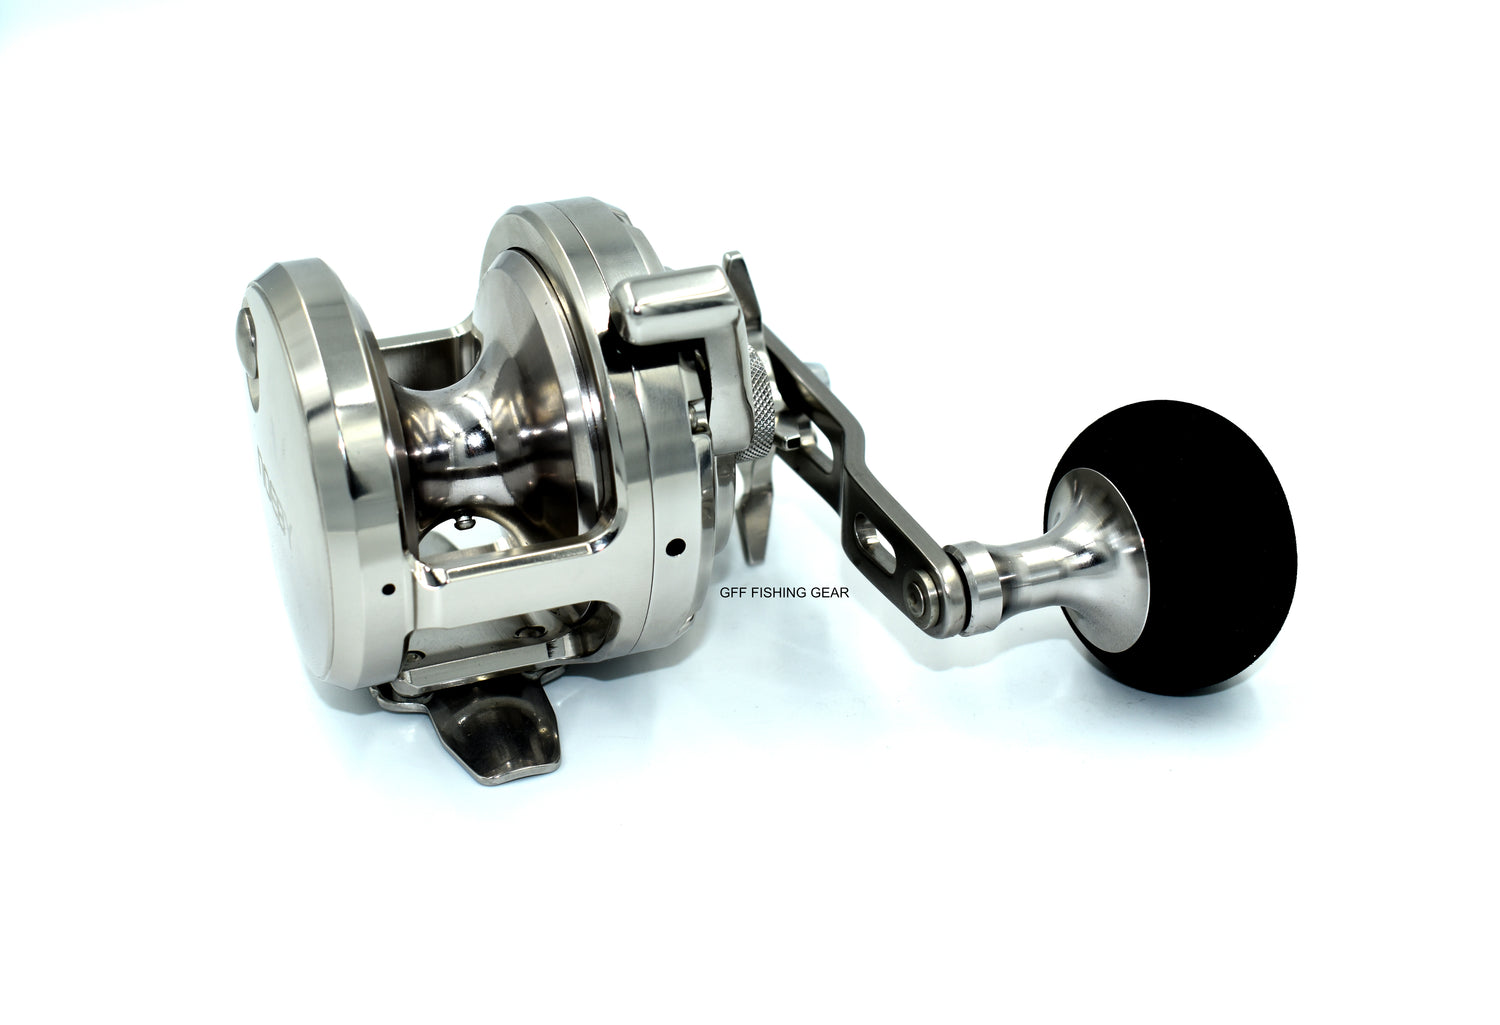 NOEBY Slow Jigging Fishing Reel 15kg 25kg Max Drag 5.2:1 Saltwater Trolling  Aluminum Alloy Boat Lure Casting 210727 From Long07, $401.34